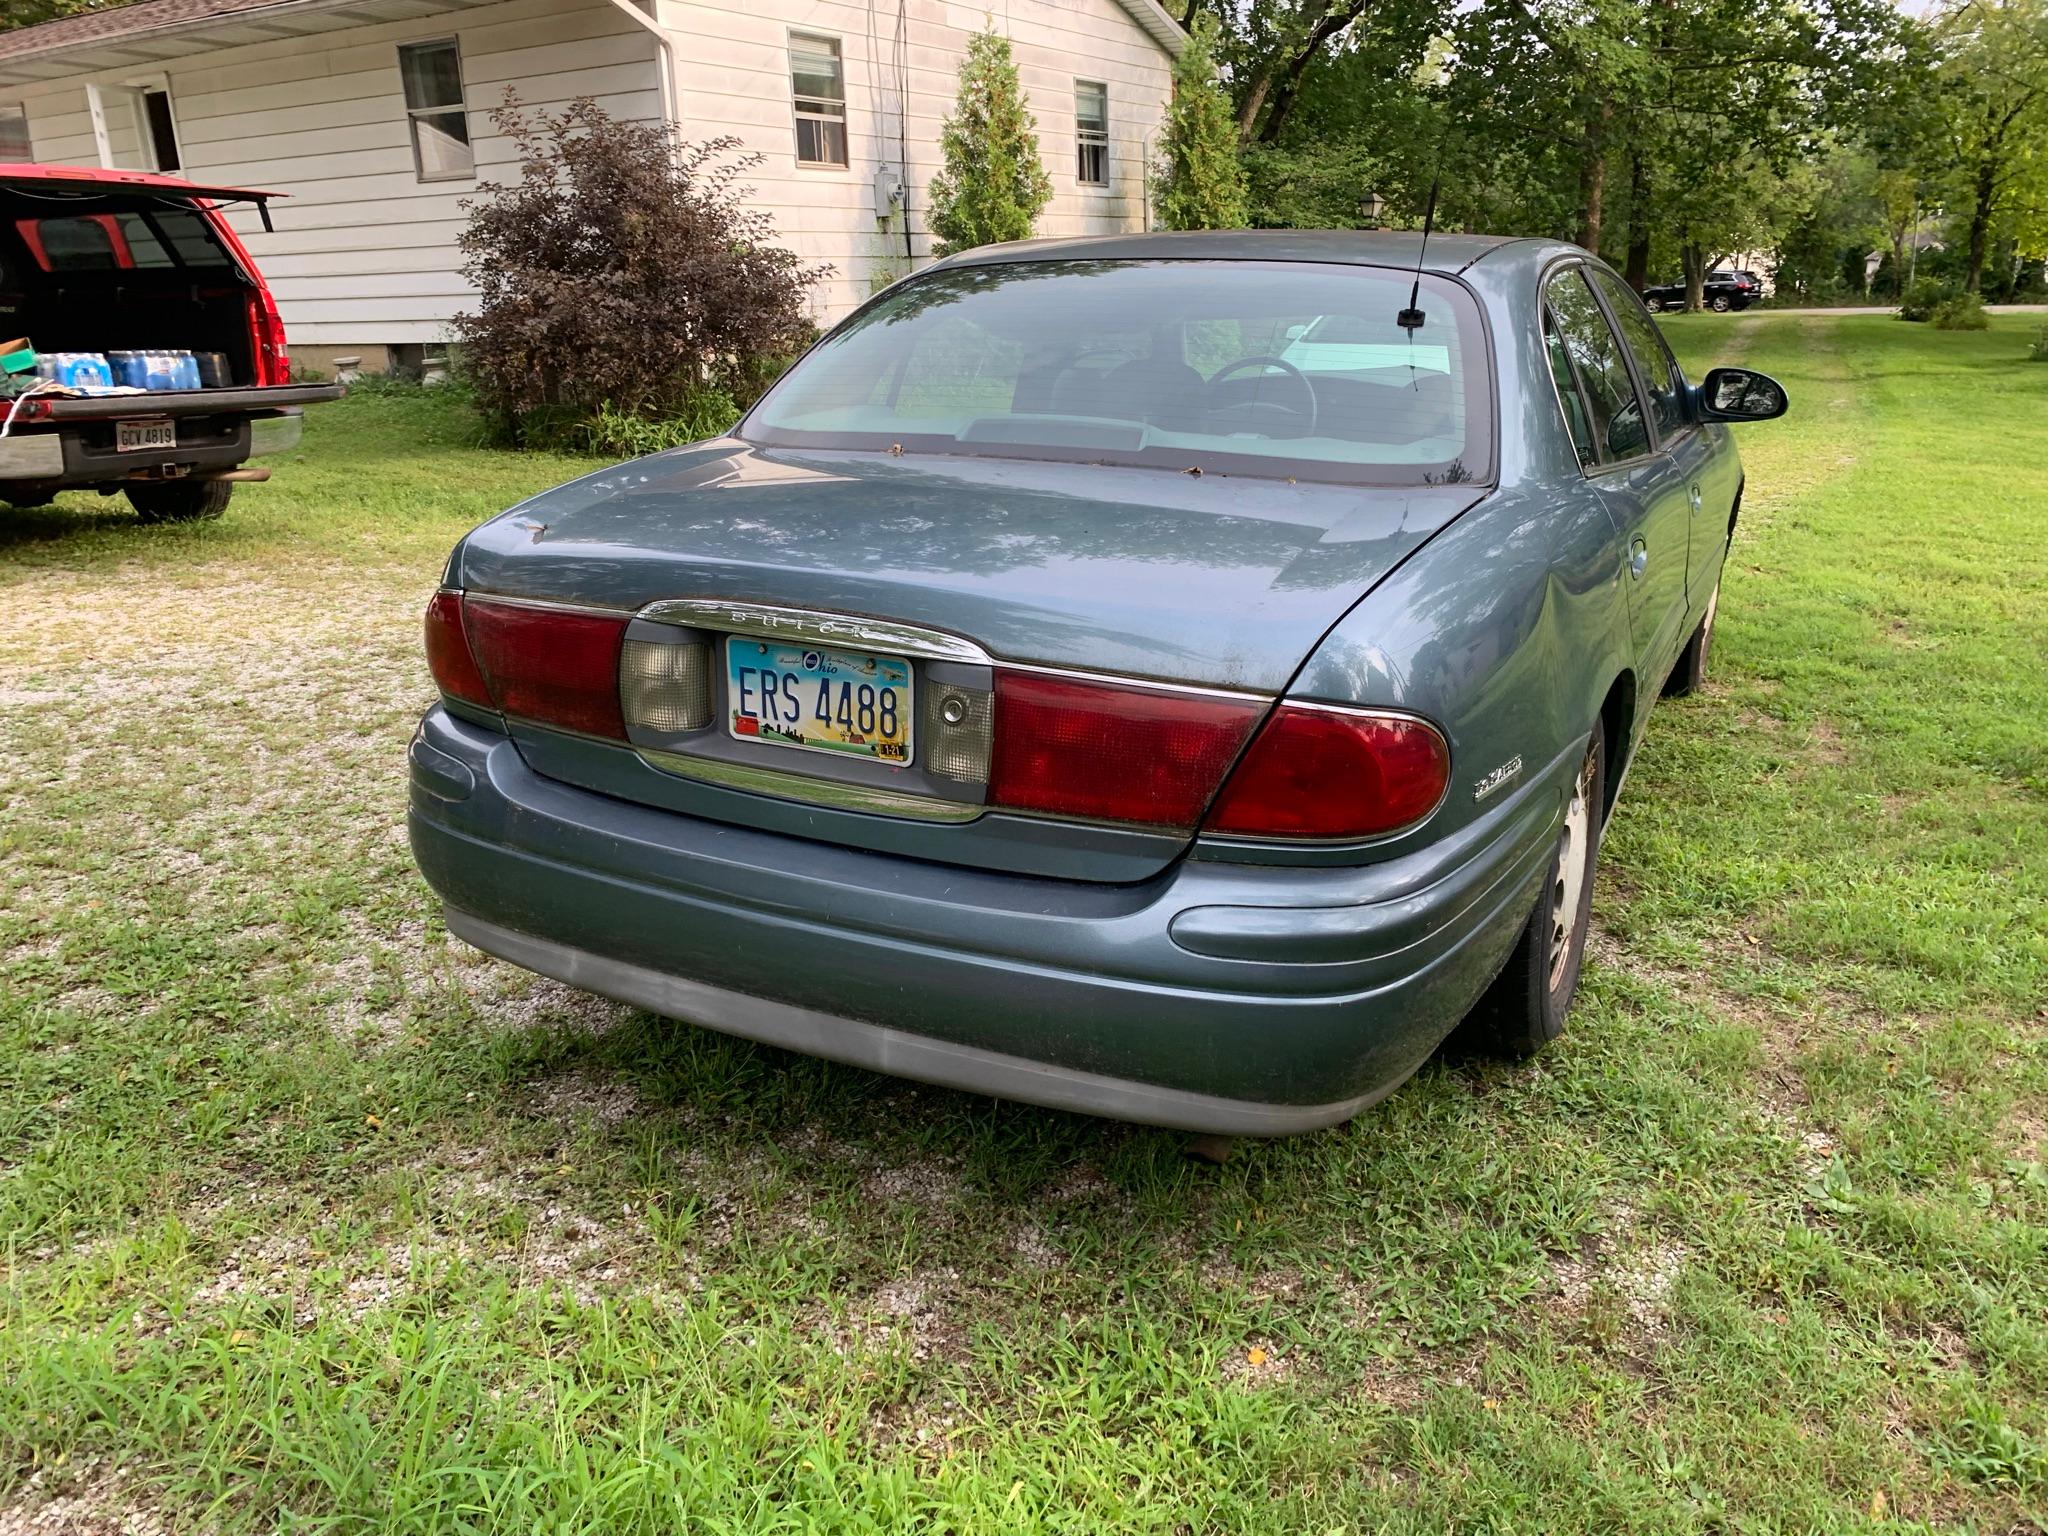 2002 Buick LeSabre Limited with Leather Interior 3800 Series II Motor. 125,178 Miles.  See Photos